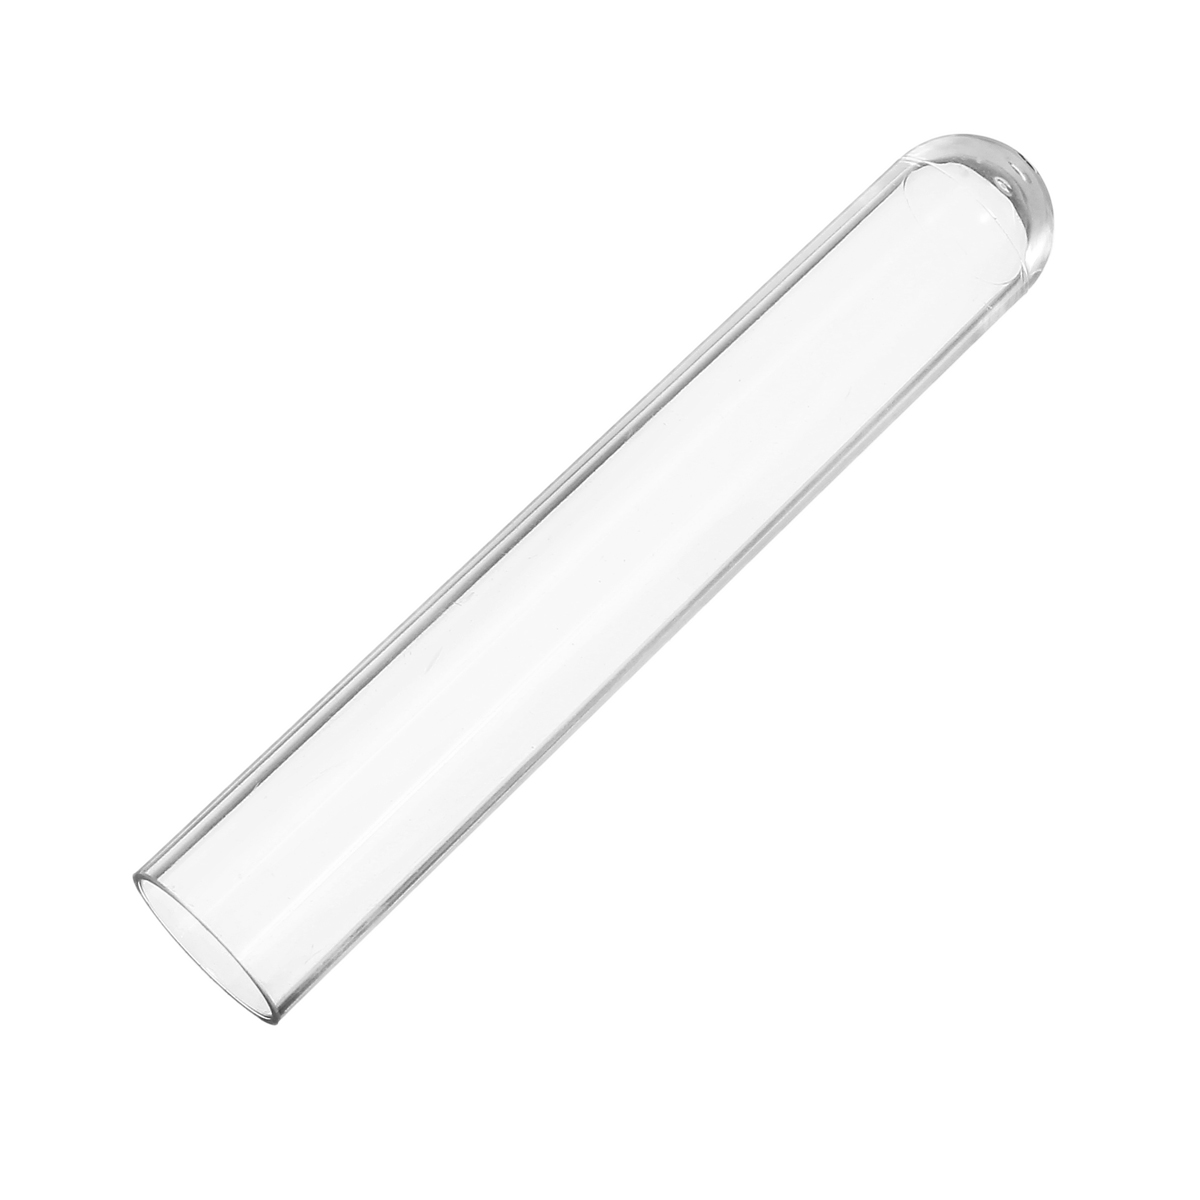 10Pcs-18100mm-Plastic-Glass-Test-Tube-With-Cork-Stopper-Medical-Lab-Supplies-1408563